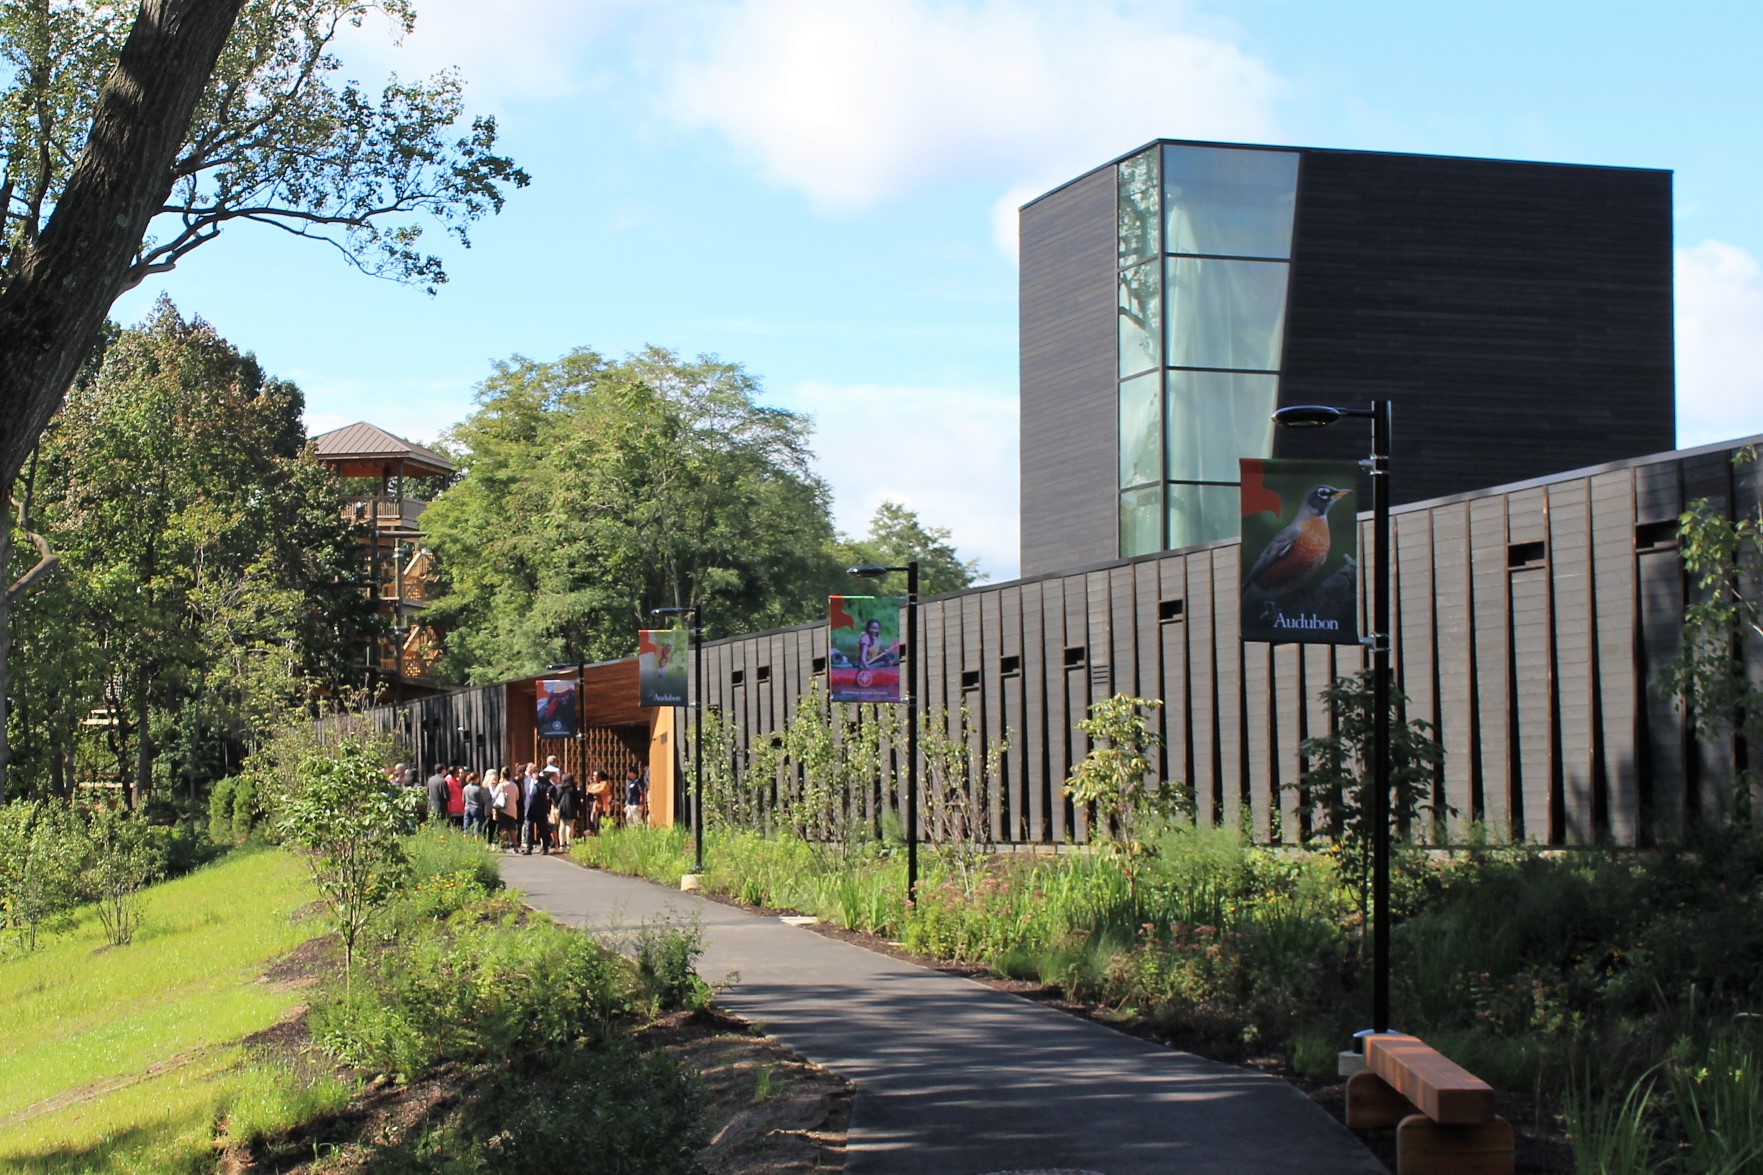 A photograph of the entrance to the new Discovery Center, shows off its modern architecture. Looking down the path lined with greenery and lampposts bearing flags featuring Audobon and Outward Bound activities and nature scenes, a crowd is gathered at the cedar-lined pass-through to the reservoir. In the background, a structure from the Outward Bound High Ropes Course can be seen through a gap in the trees.